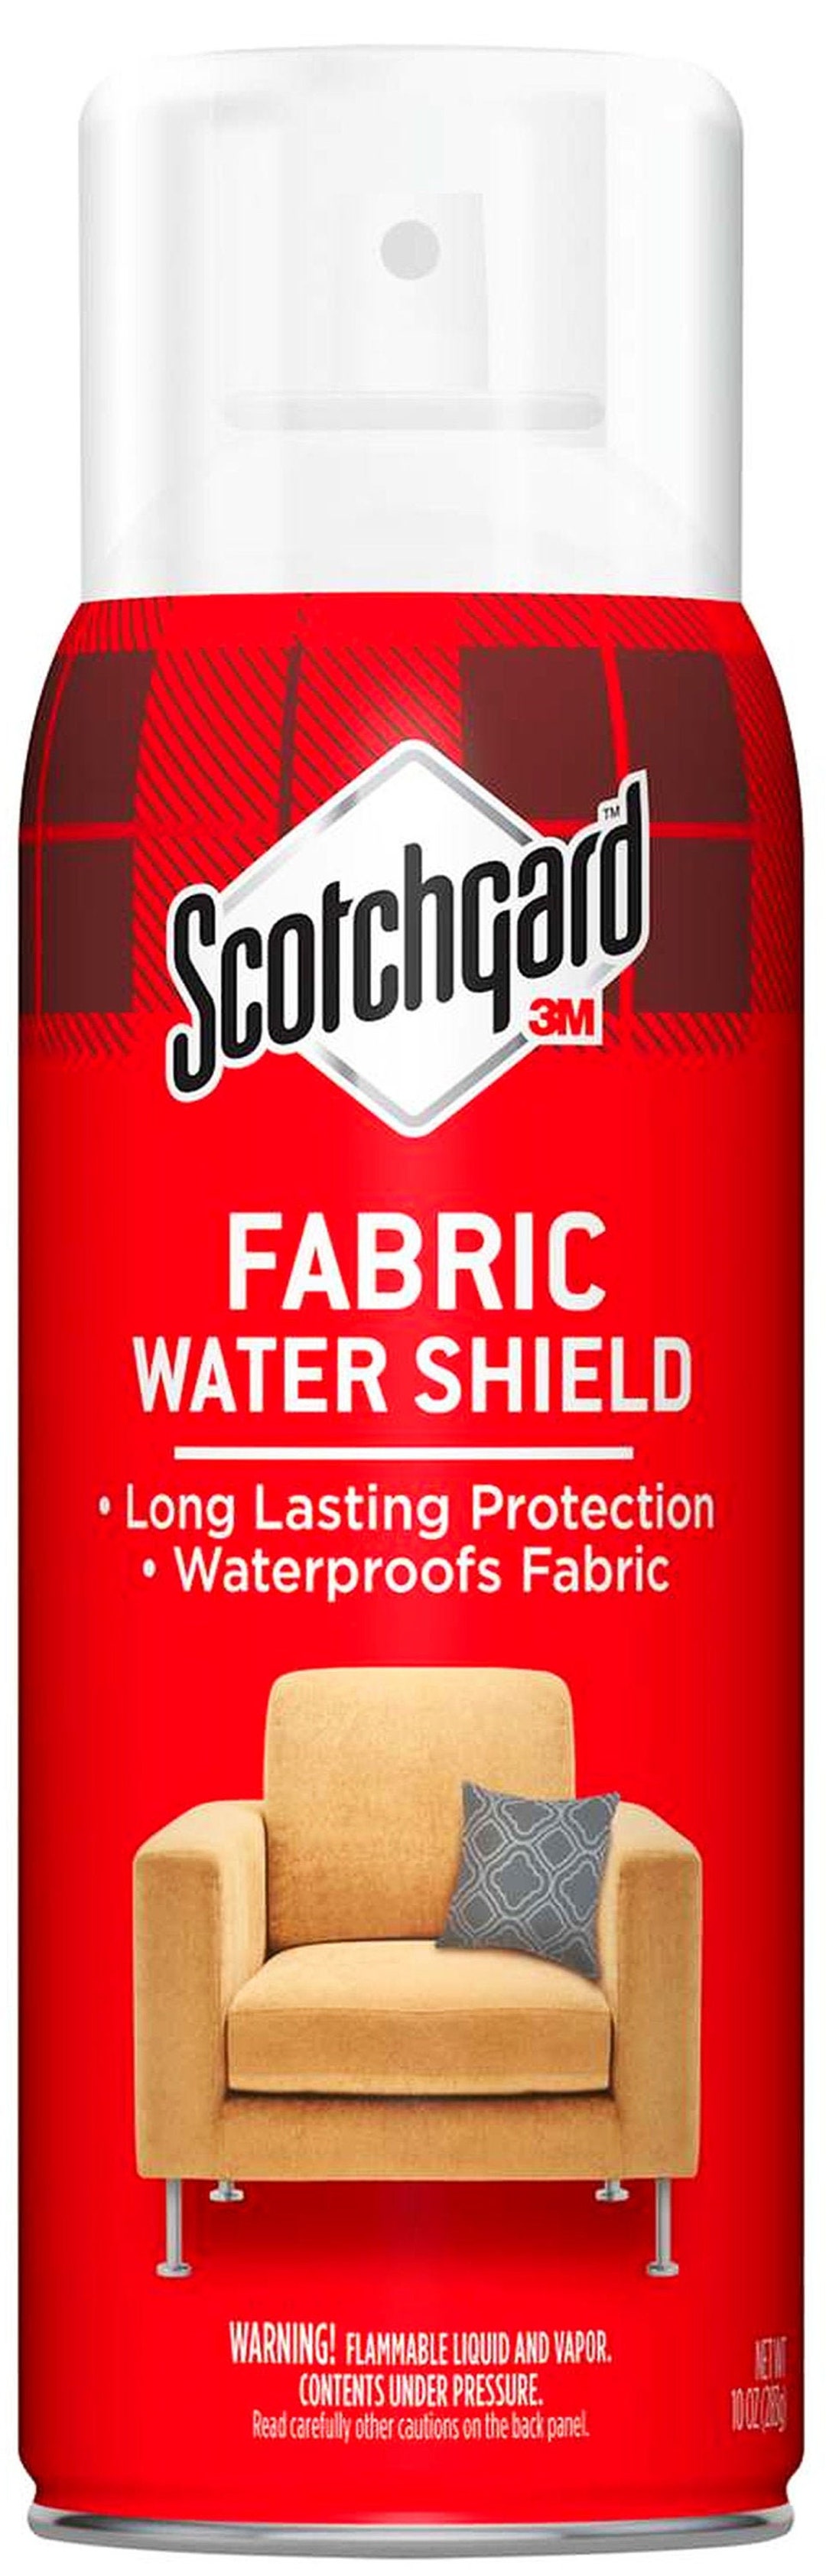 Fabric Protector Spray - Martins Upholstery Supplies